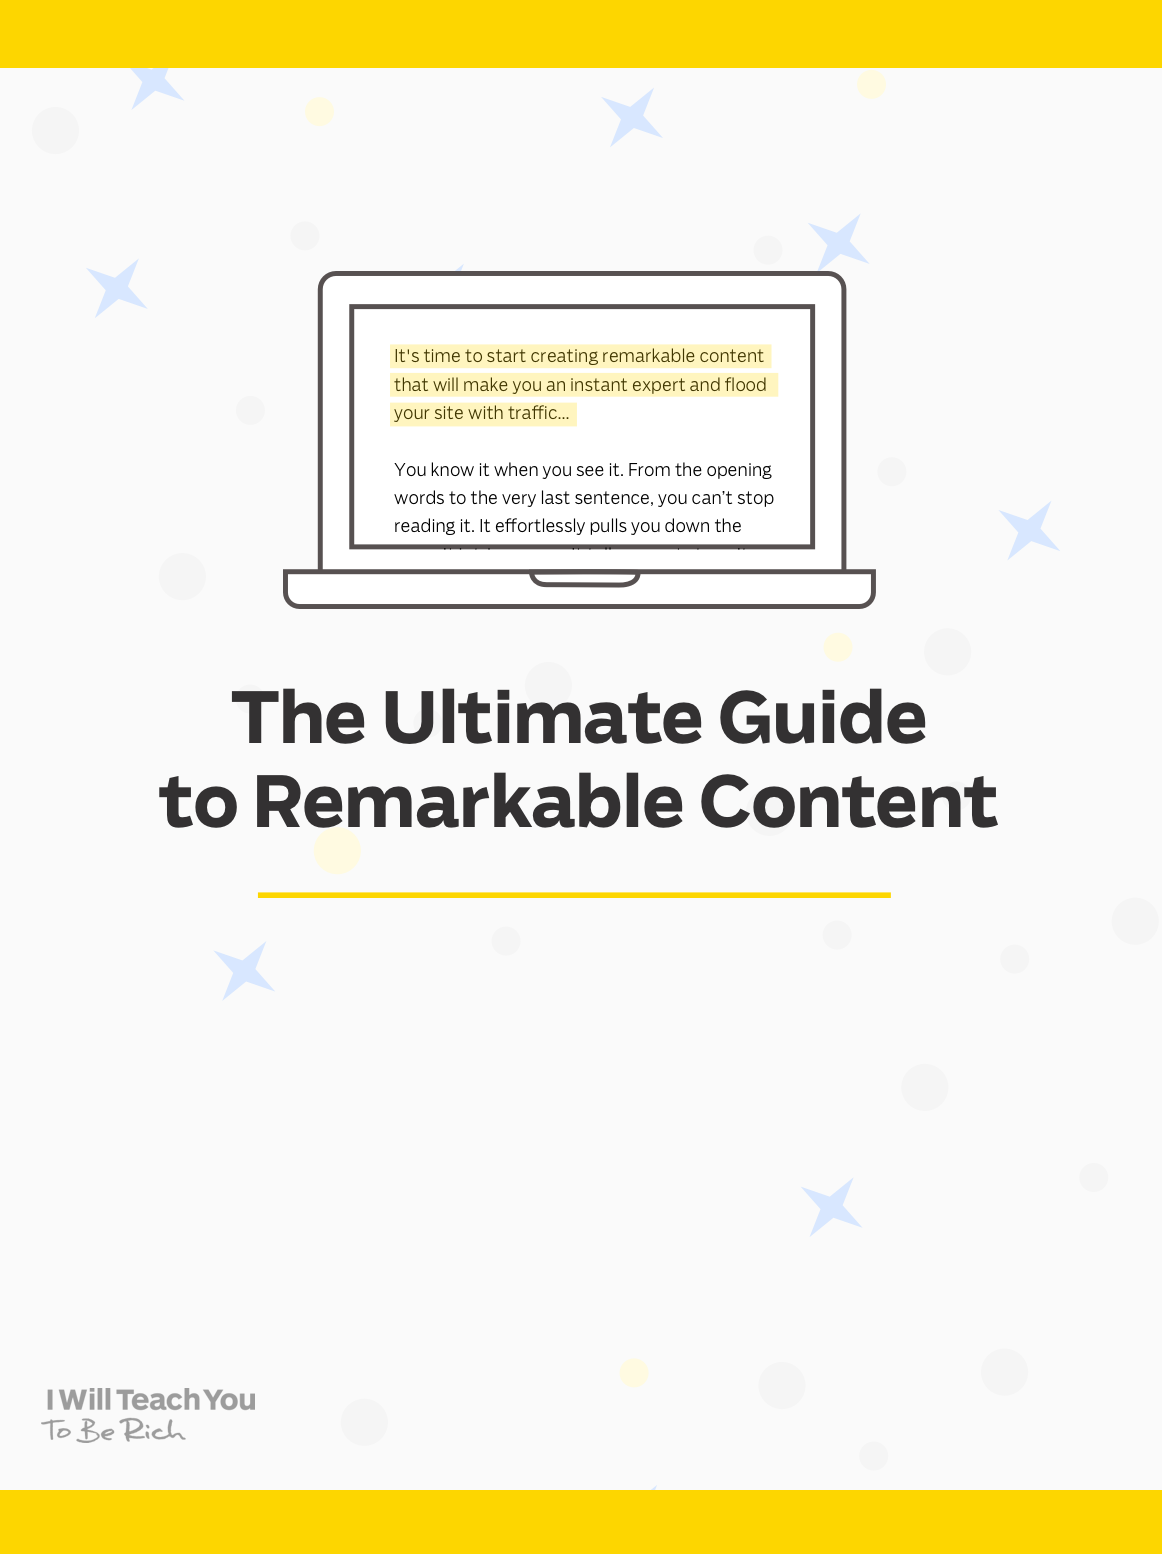 Get the Ultimate Guide to Remarkable Content as a downloadable PDF